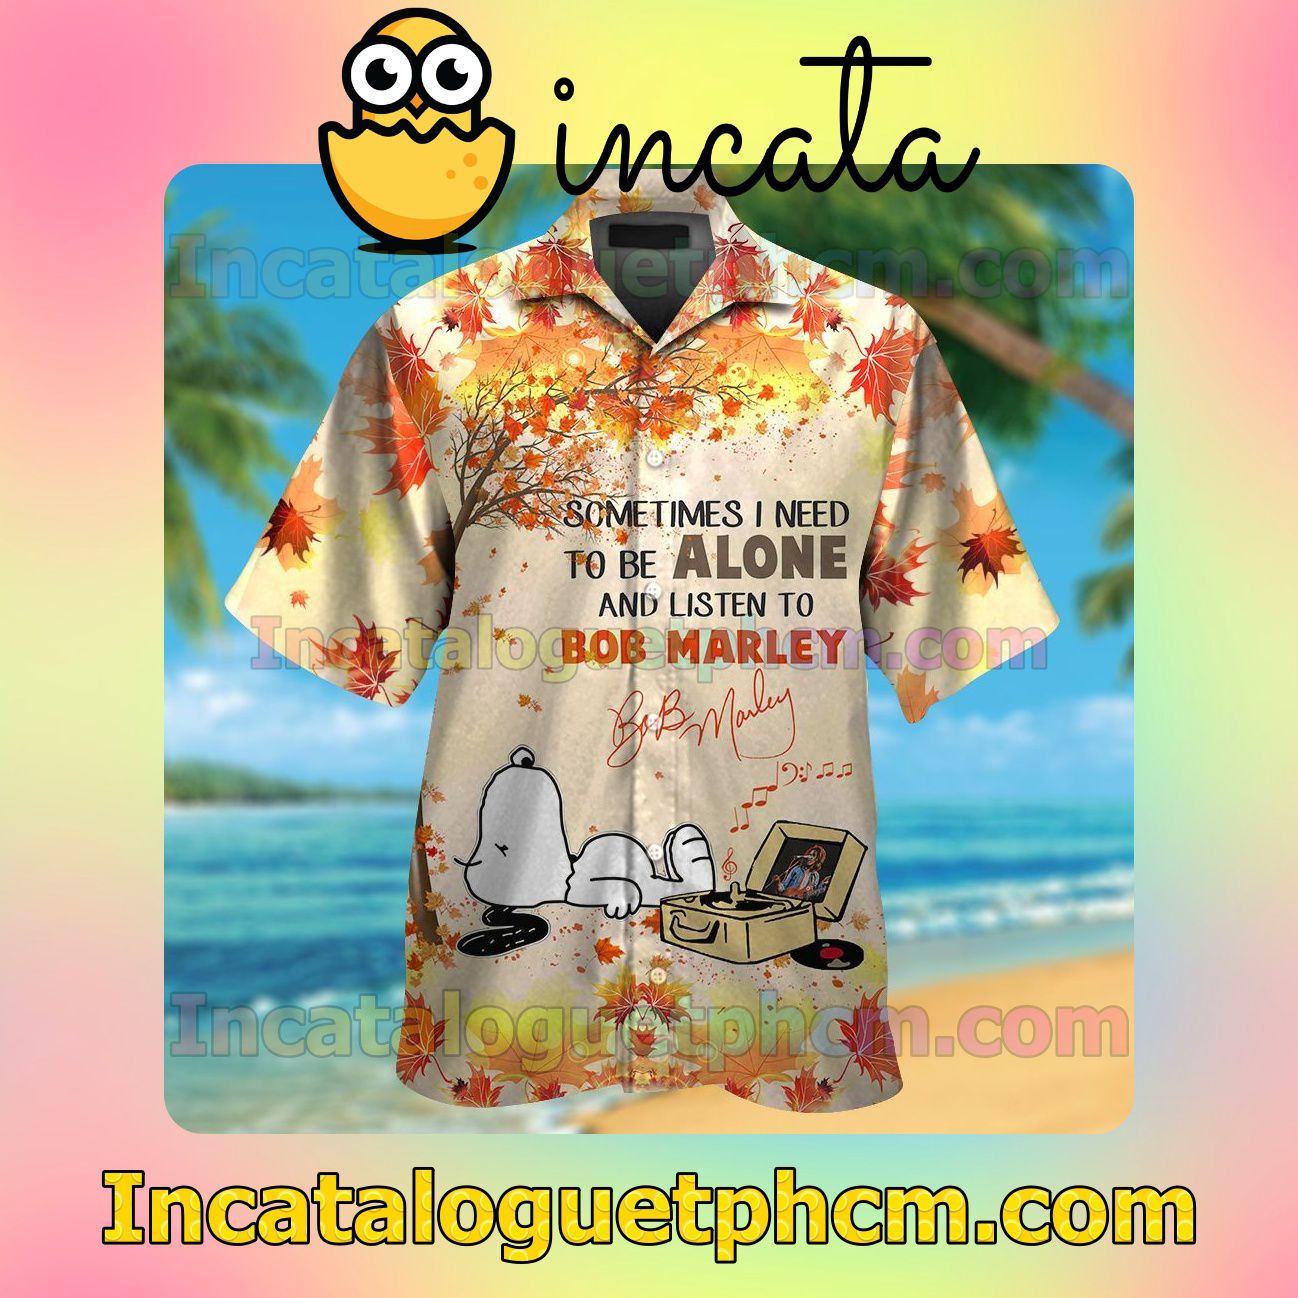 To Be Alone And Listen To Bob Marley Beach Vacation Shirt, Swim Shorts